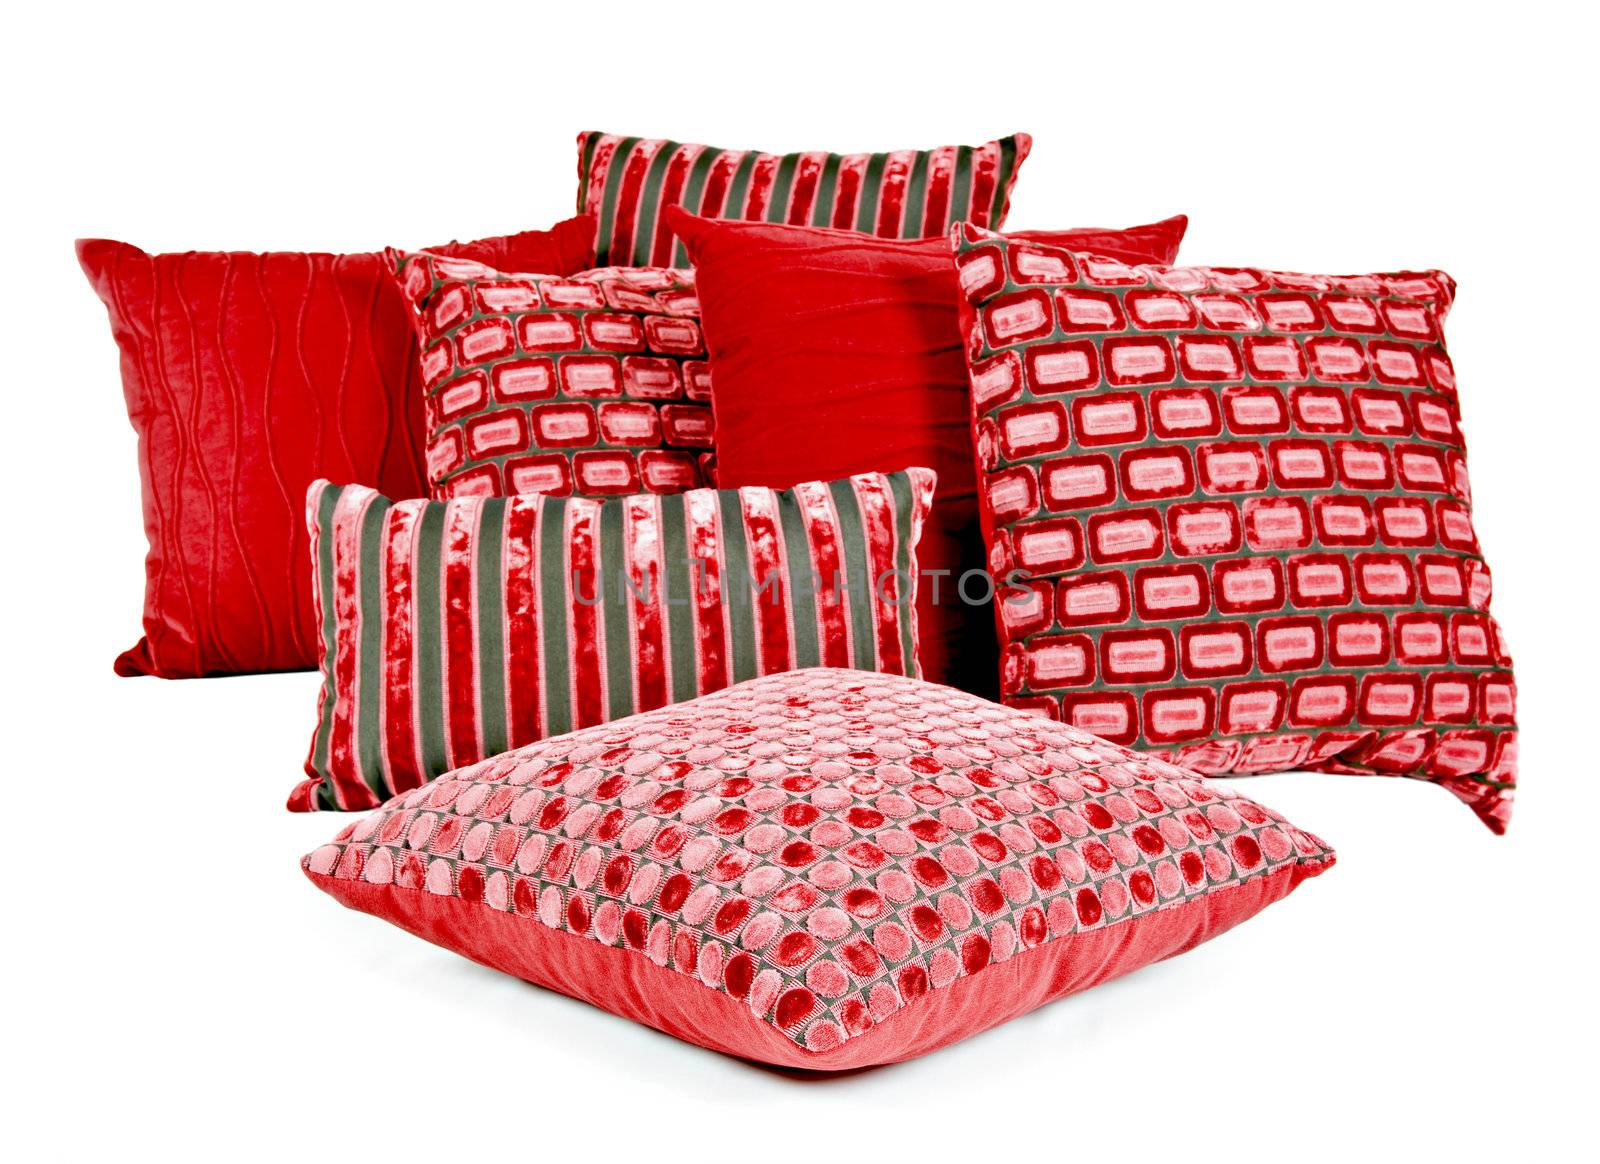 Combination of red and brown pillows on a white background